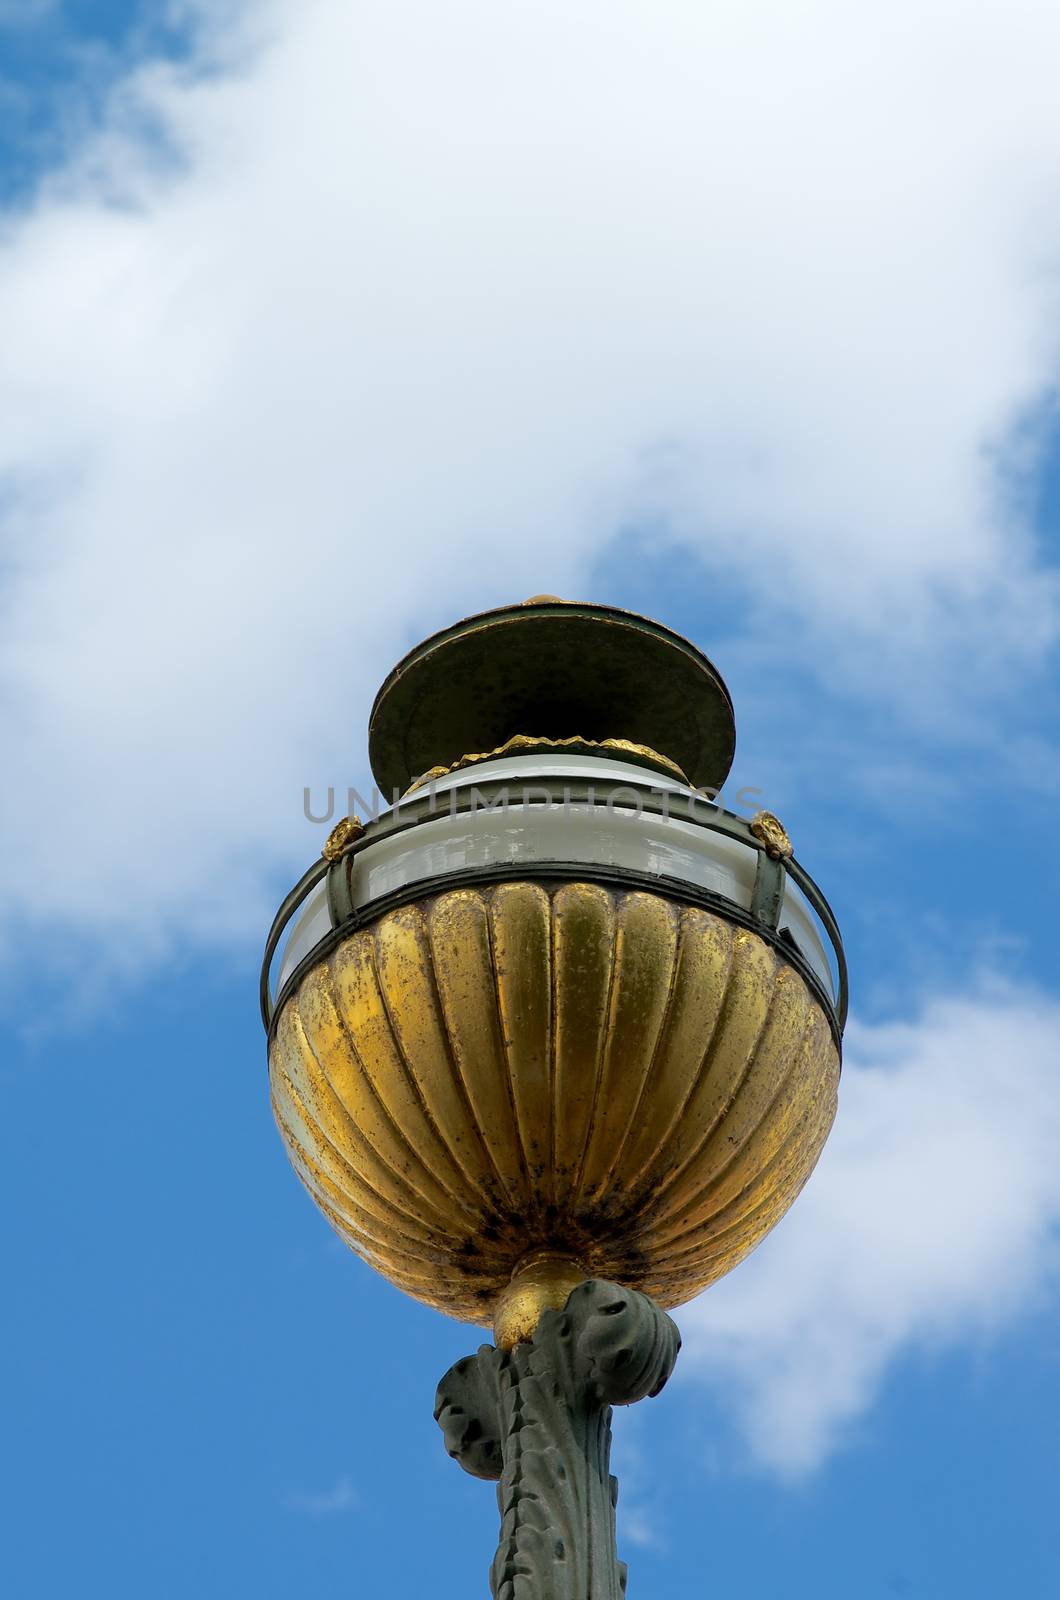 Old-fashioned Decorative Street Lantern with Gold Details on Blue and Cloudy background Outdoors